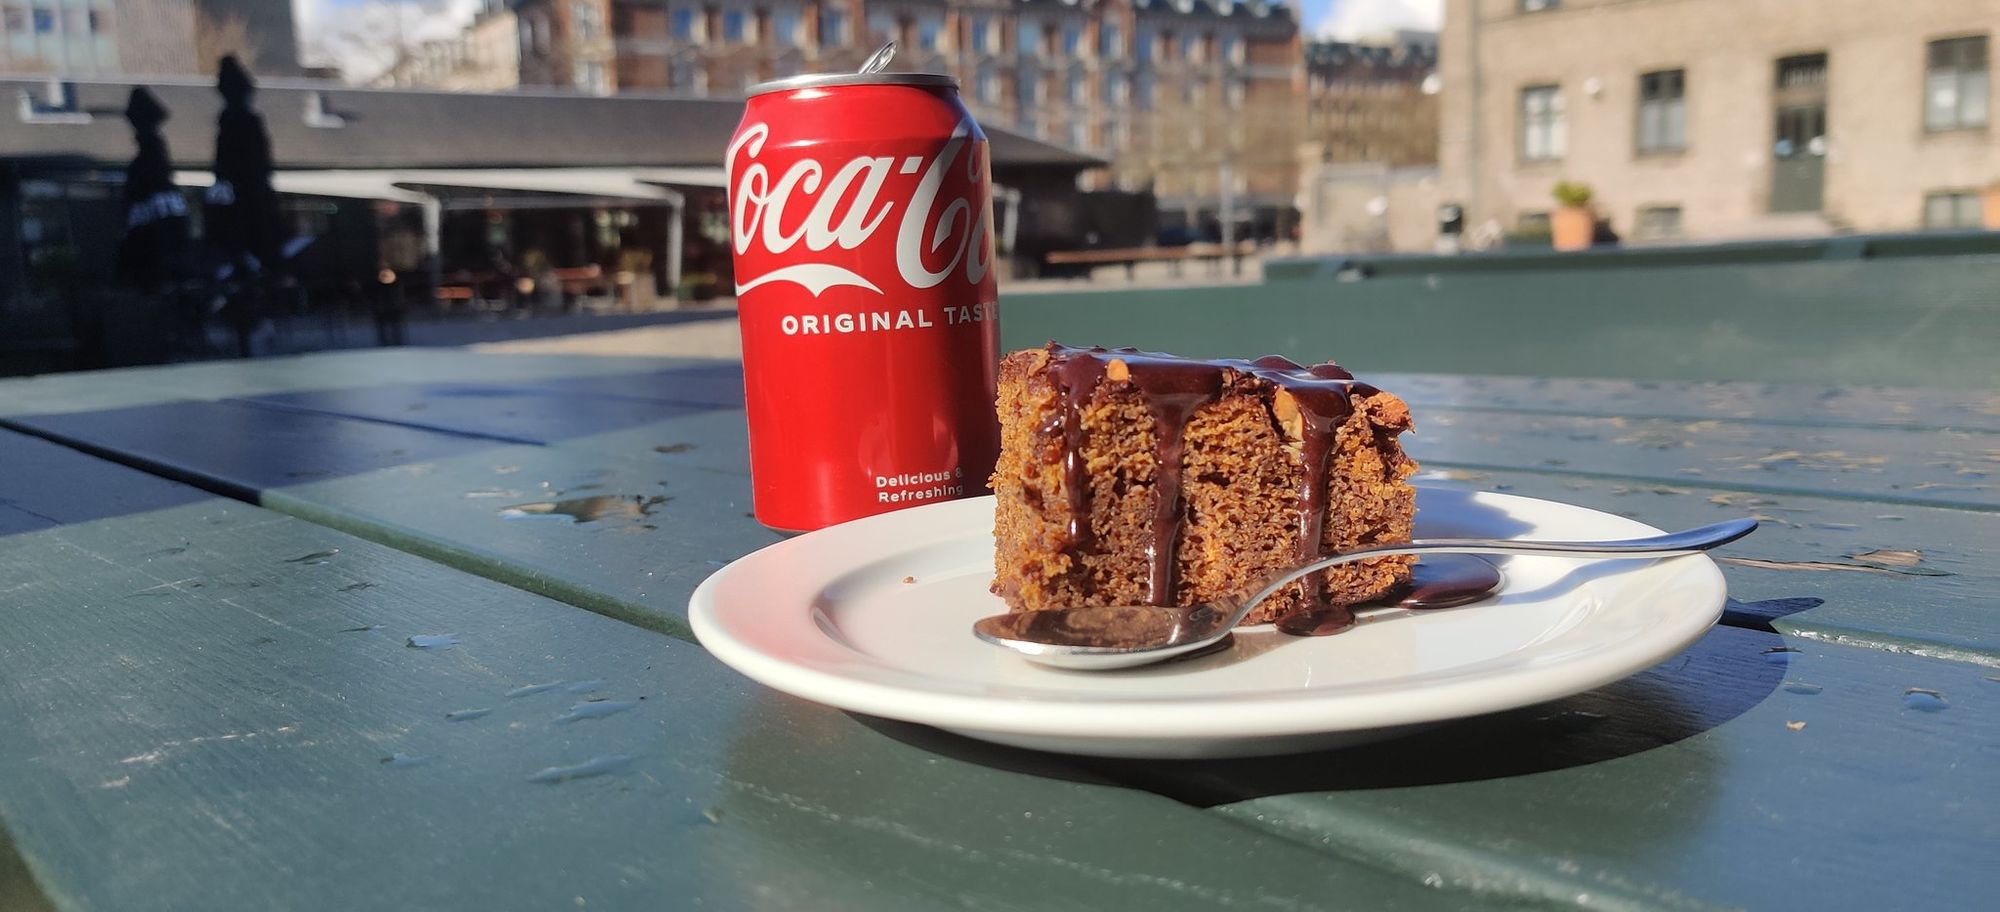 A can of coke and a piece of chocolate cake, taken outside on a sunny afternoon day